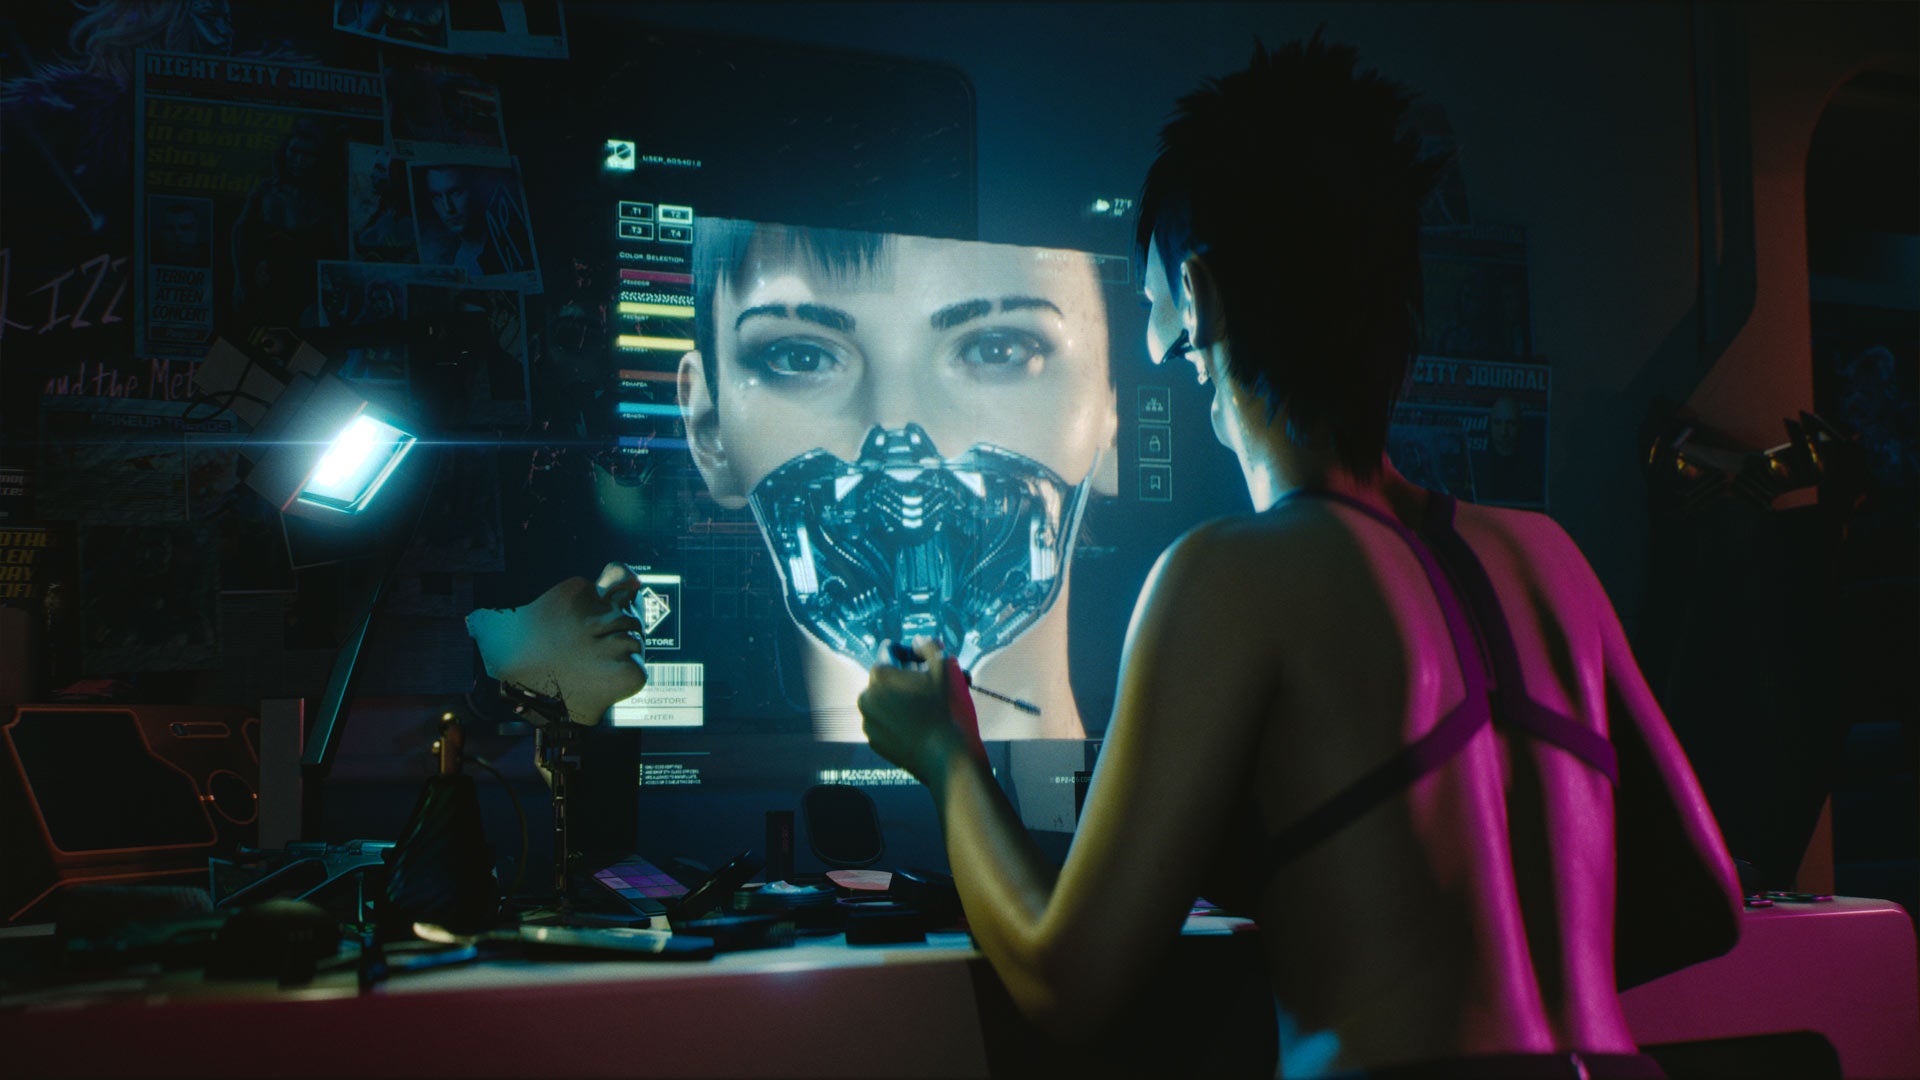 Image for Cyberpunk 2077 will feature full nudity for a good reason